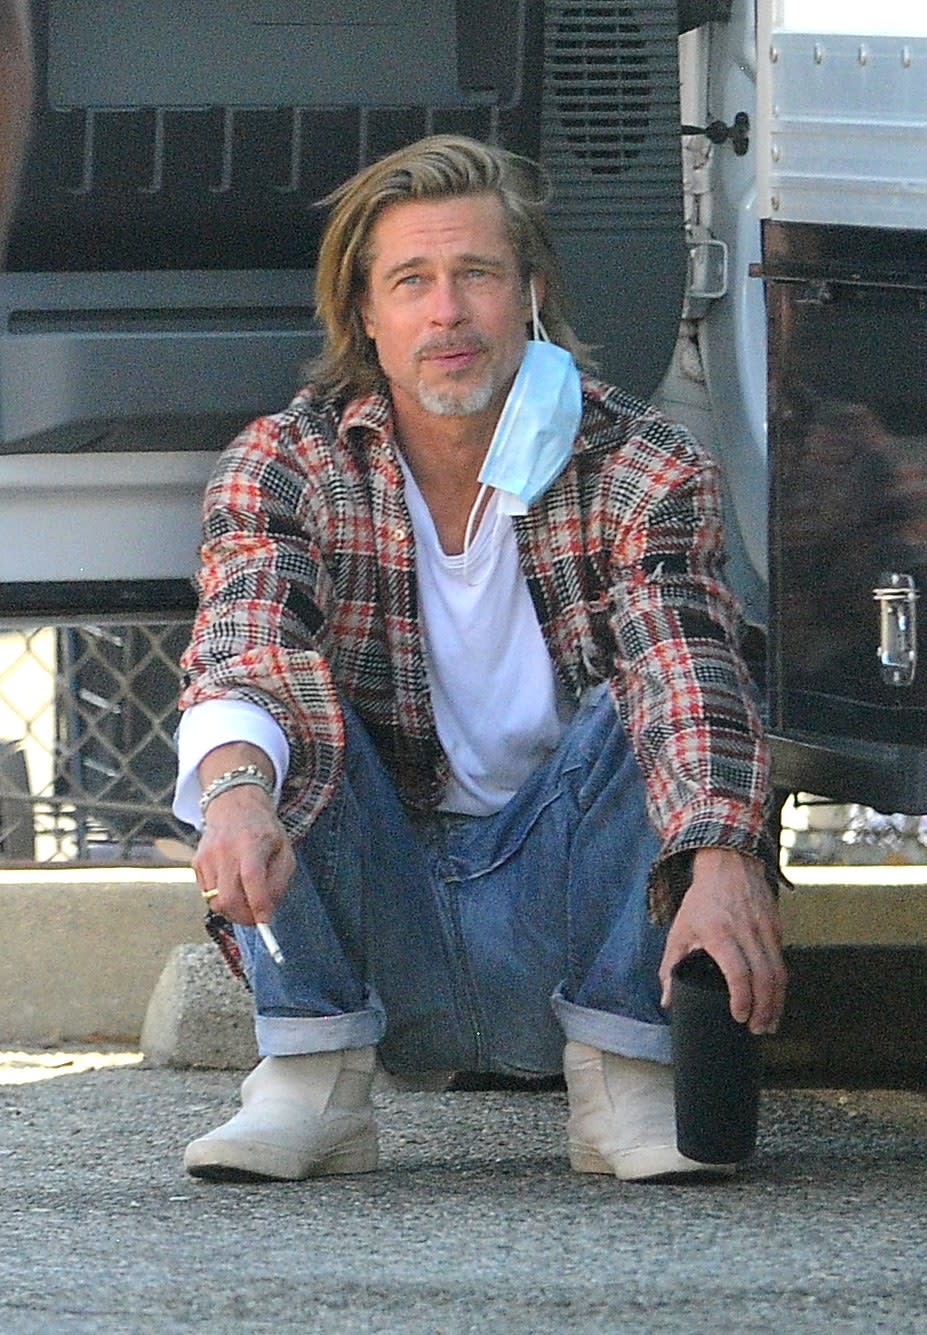 Brad Pitt delivering food to low-income families in Los Angeles.